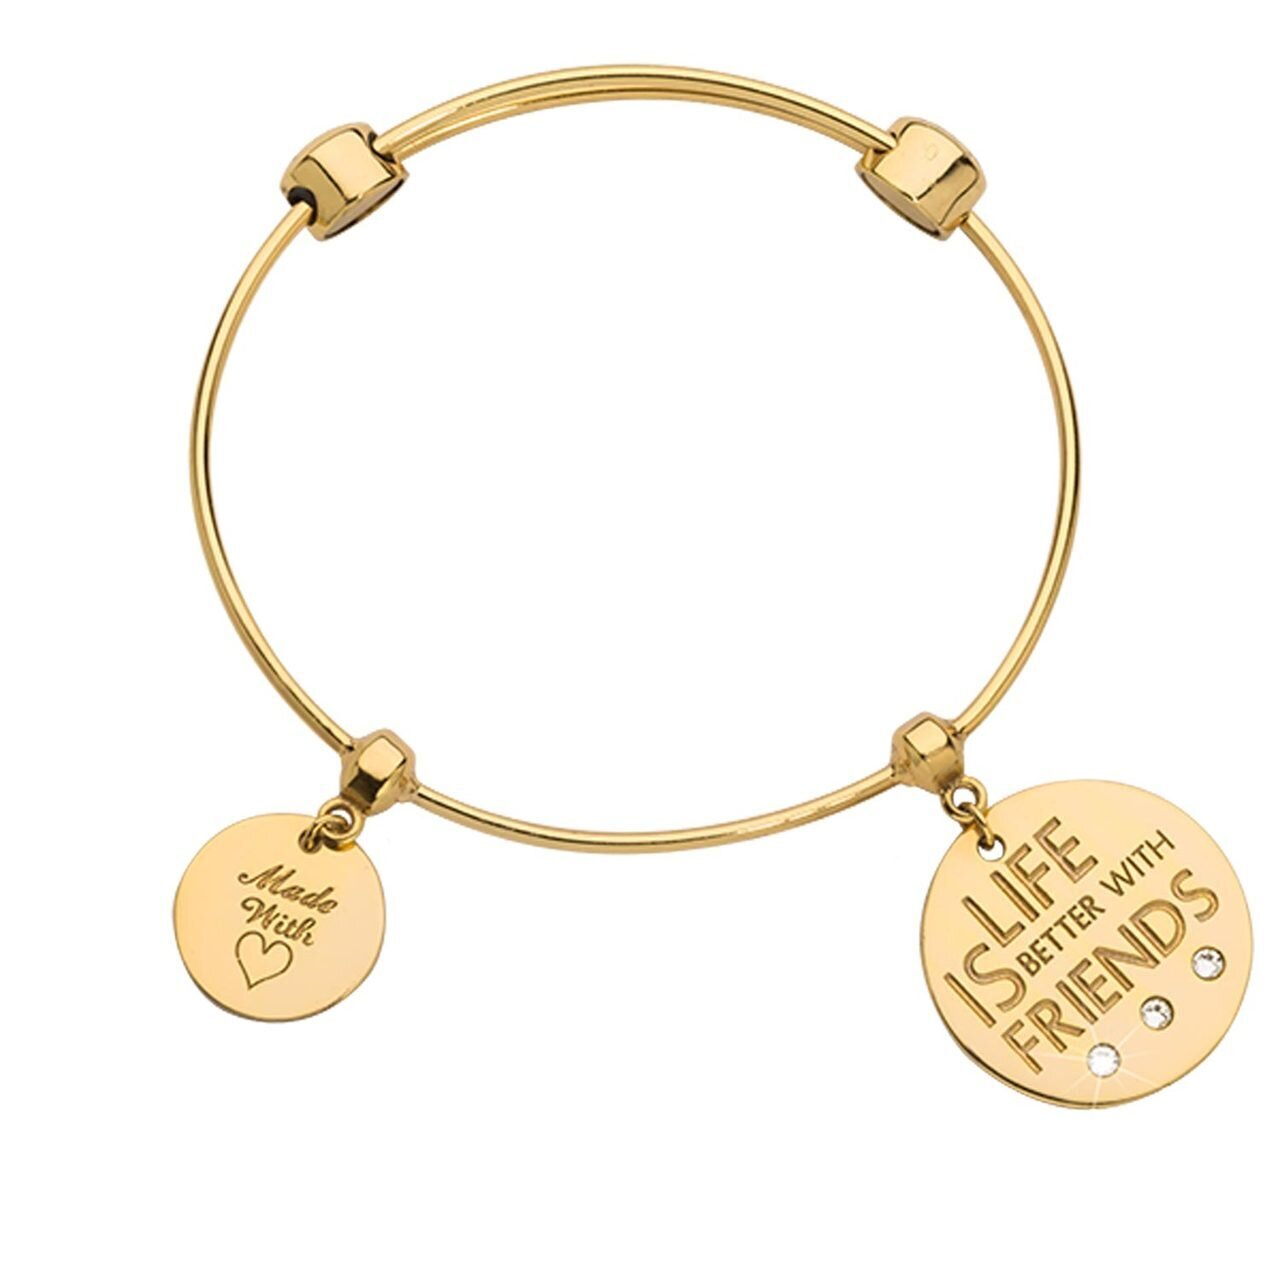 Nikki Lissoni Charm Bangle with Two Fixed Charms Life Is Better with Friends Made with Love Gold-plated 17cm B1153G17